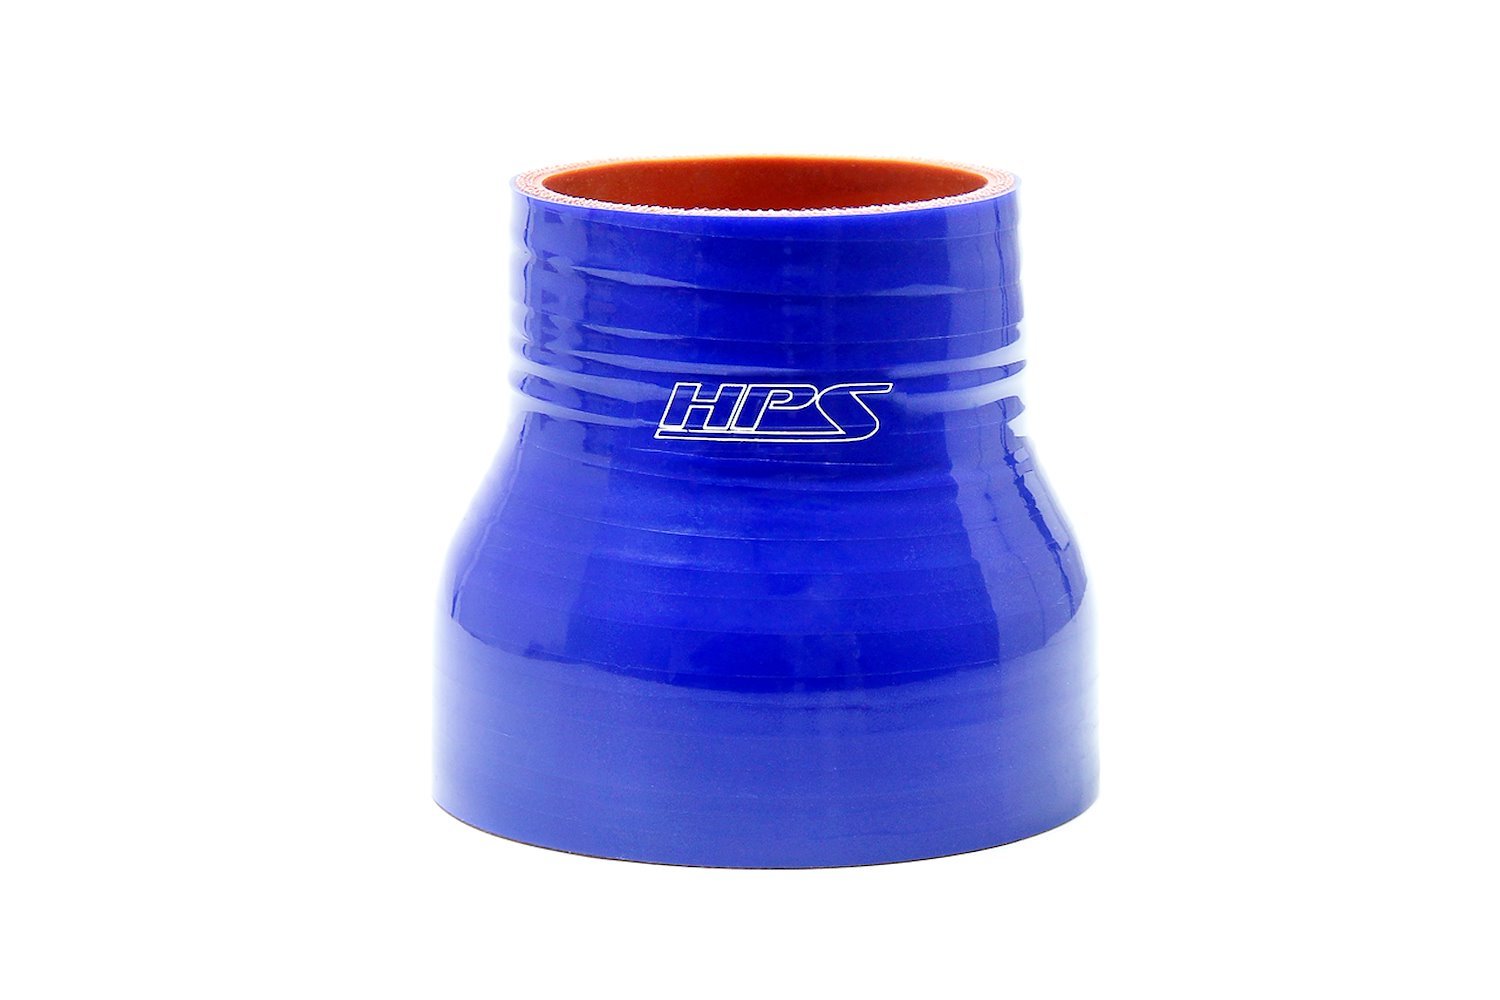 HTSR-150-200-L4-BLUE Silicone Reducer Hose, High-Temp 4-Ply Reinforced, 1-1/2 in. - 2 in. ID, 4 in. Long, Blue